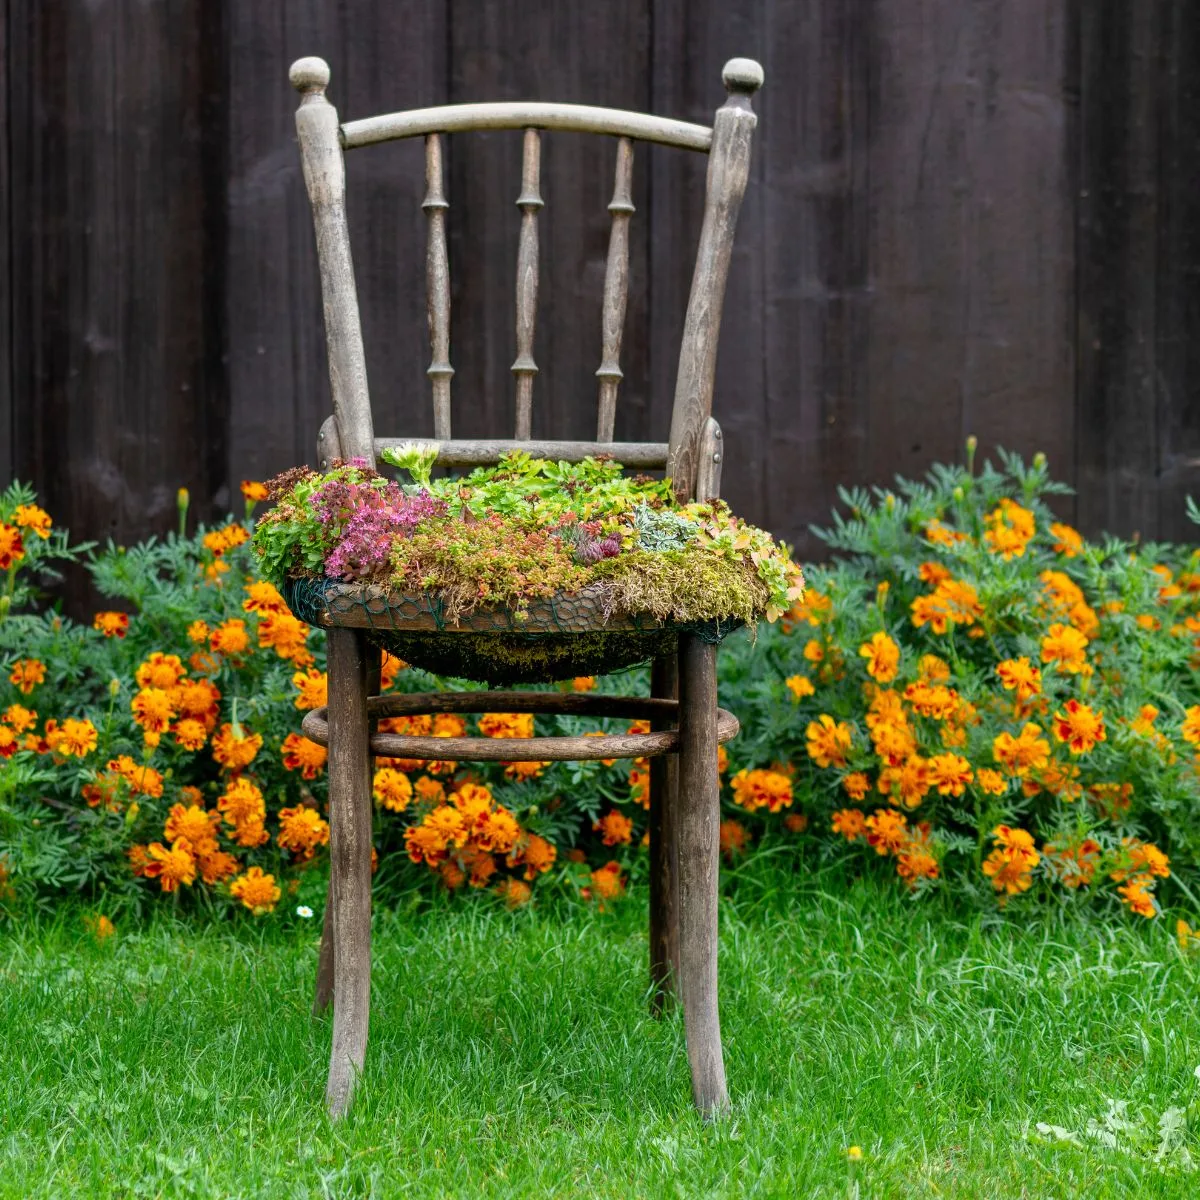 A wooden chair made into a planter and filled with succulents, and surrounded by blooming marigolds